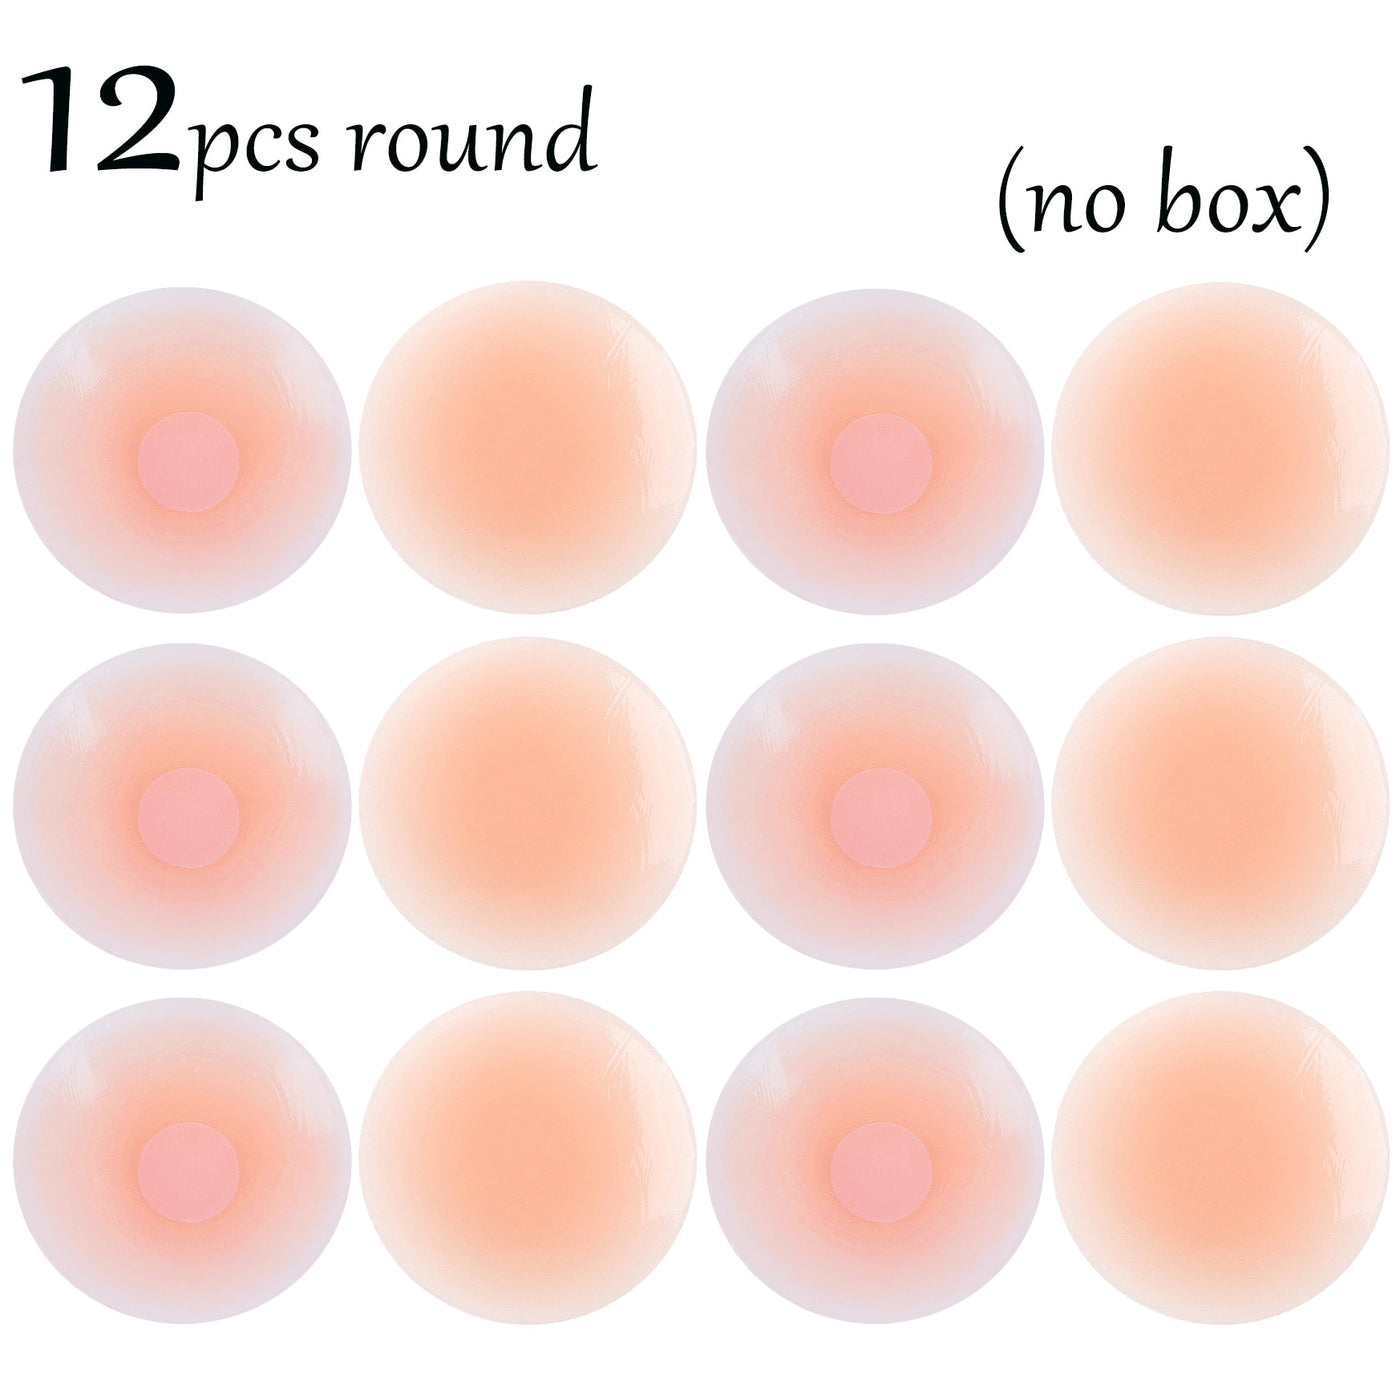 Silicone Nipple Cover Reusable